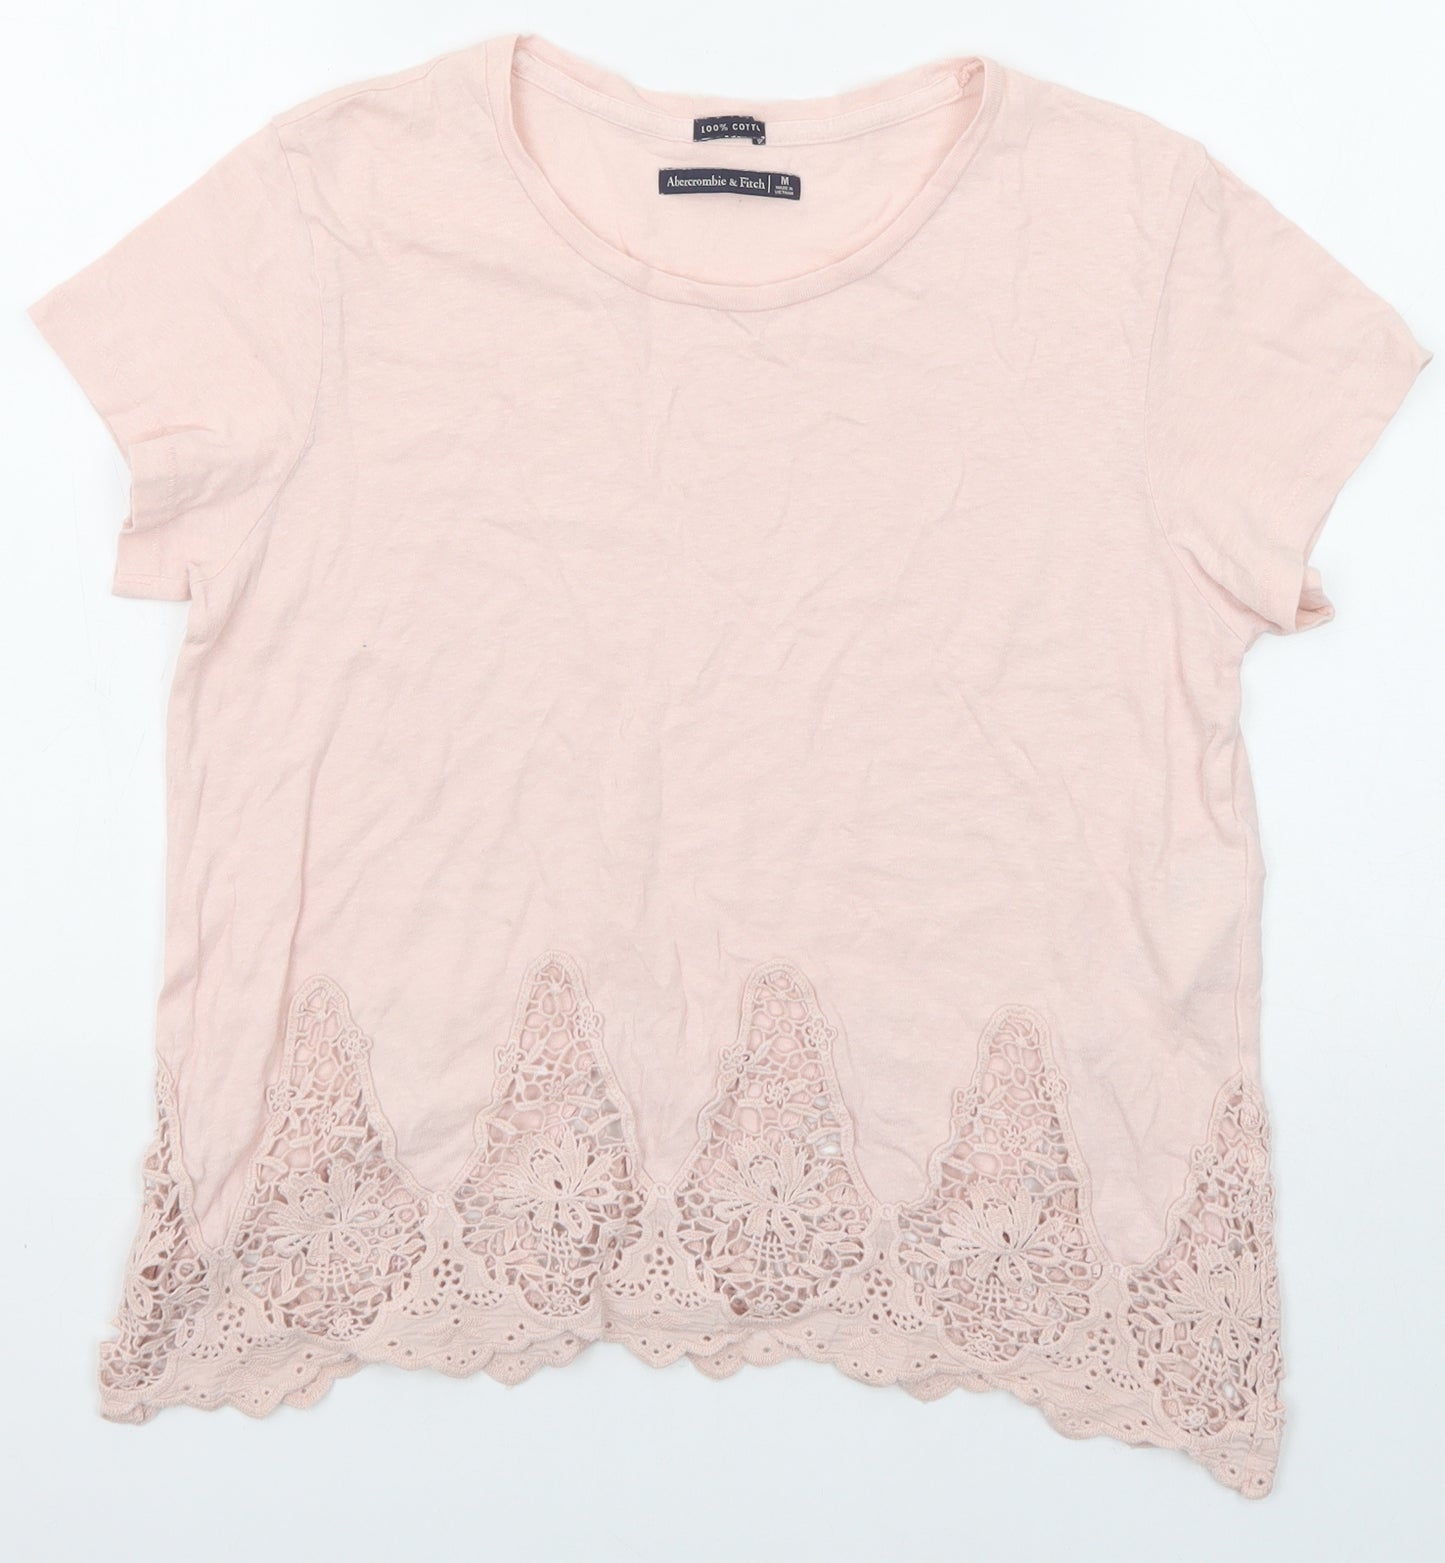 Abercrombie & Fitch Womens Pink Cotton Basic T-Shirt Size M Round Neck - Crochet Detail